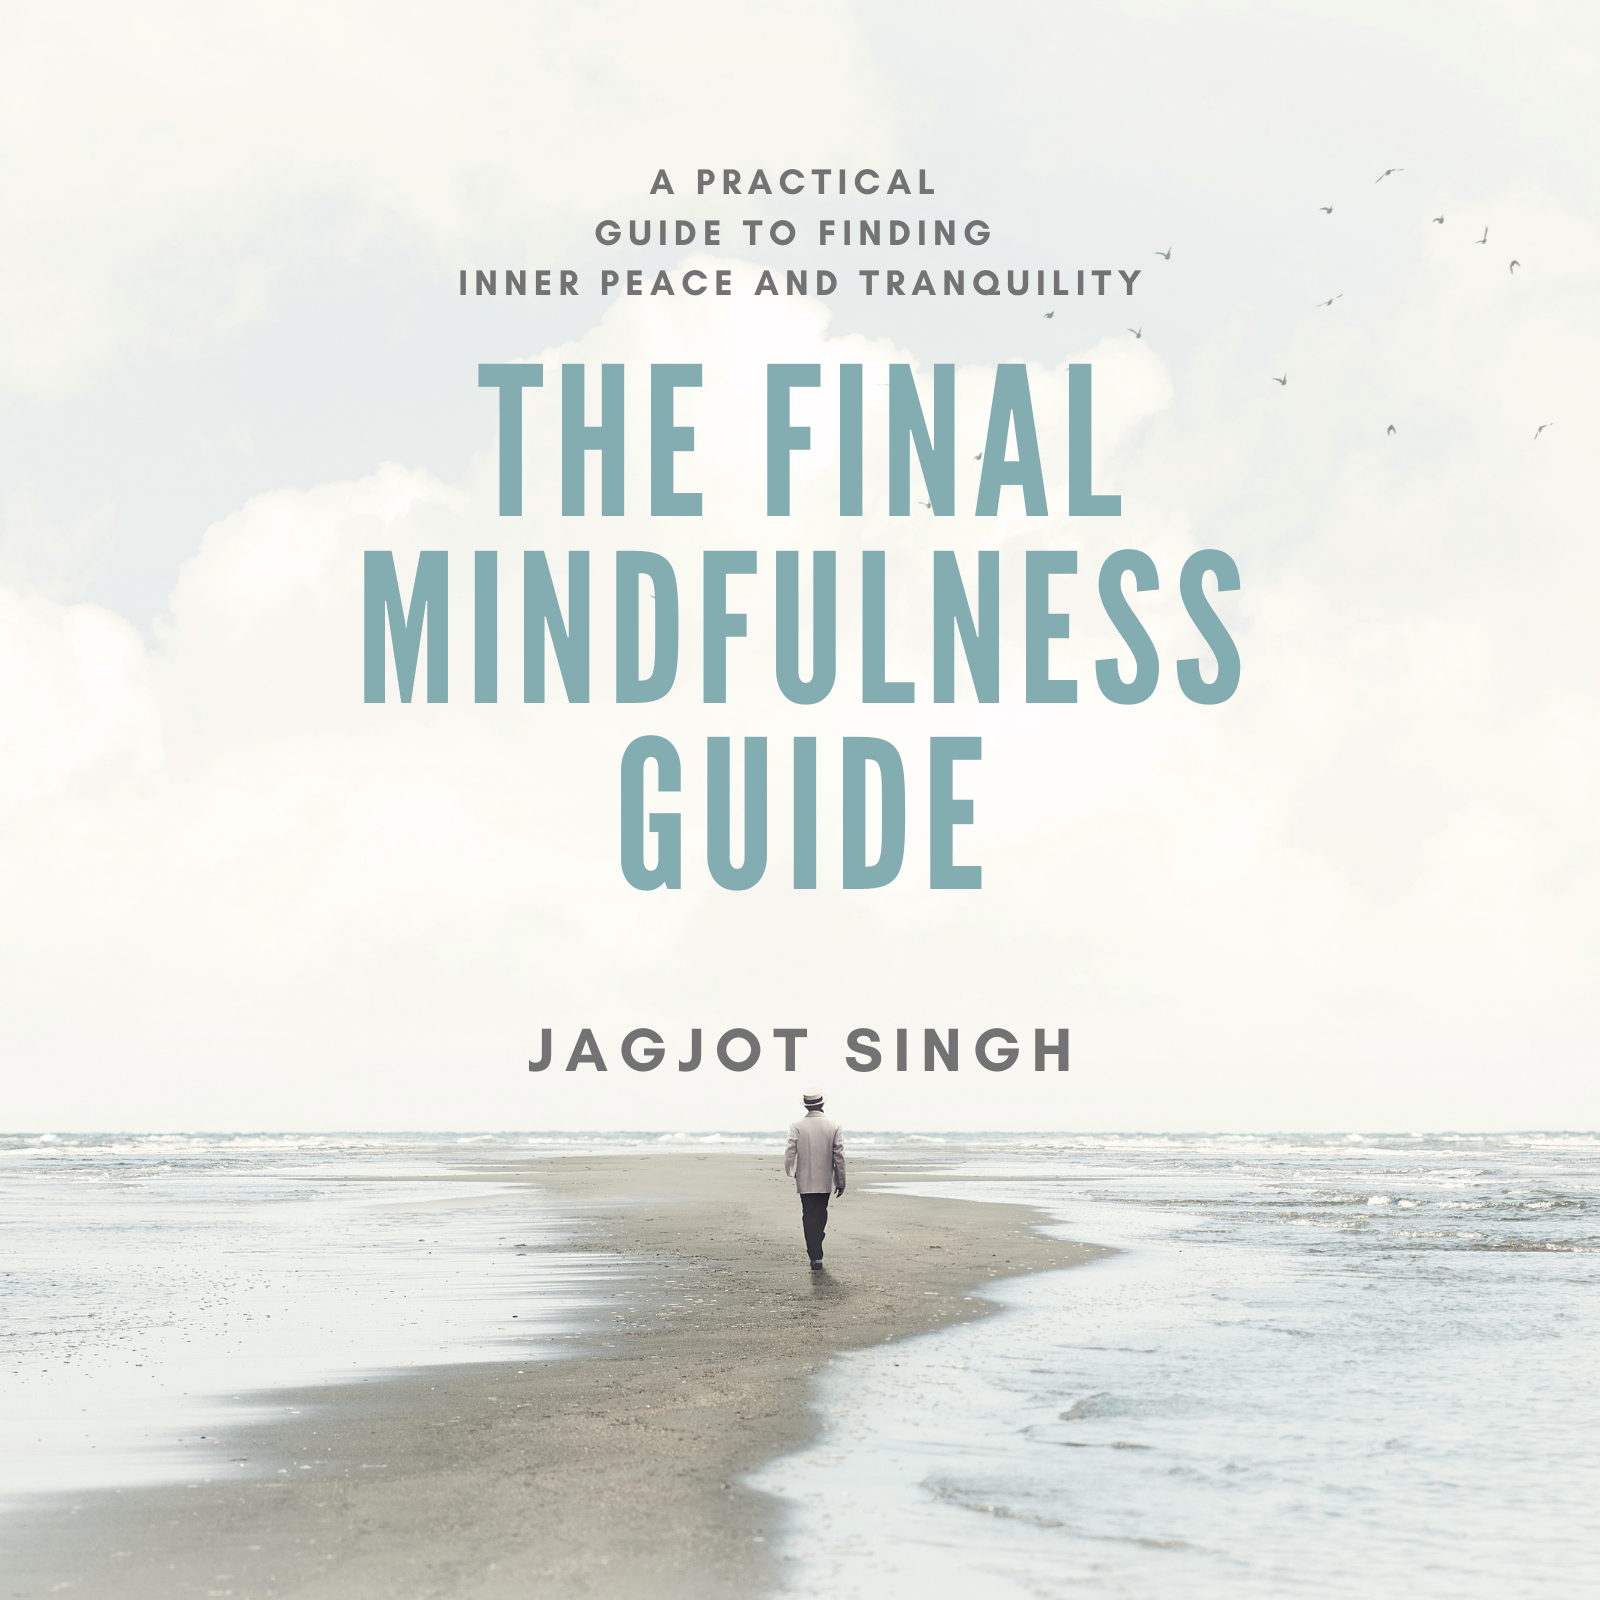 the_final_mindfulness_guide_kindle_cover (1600 × 1600 px)